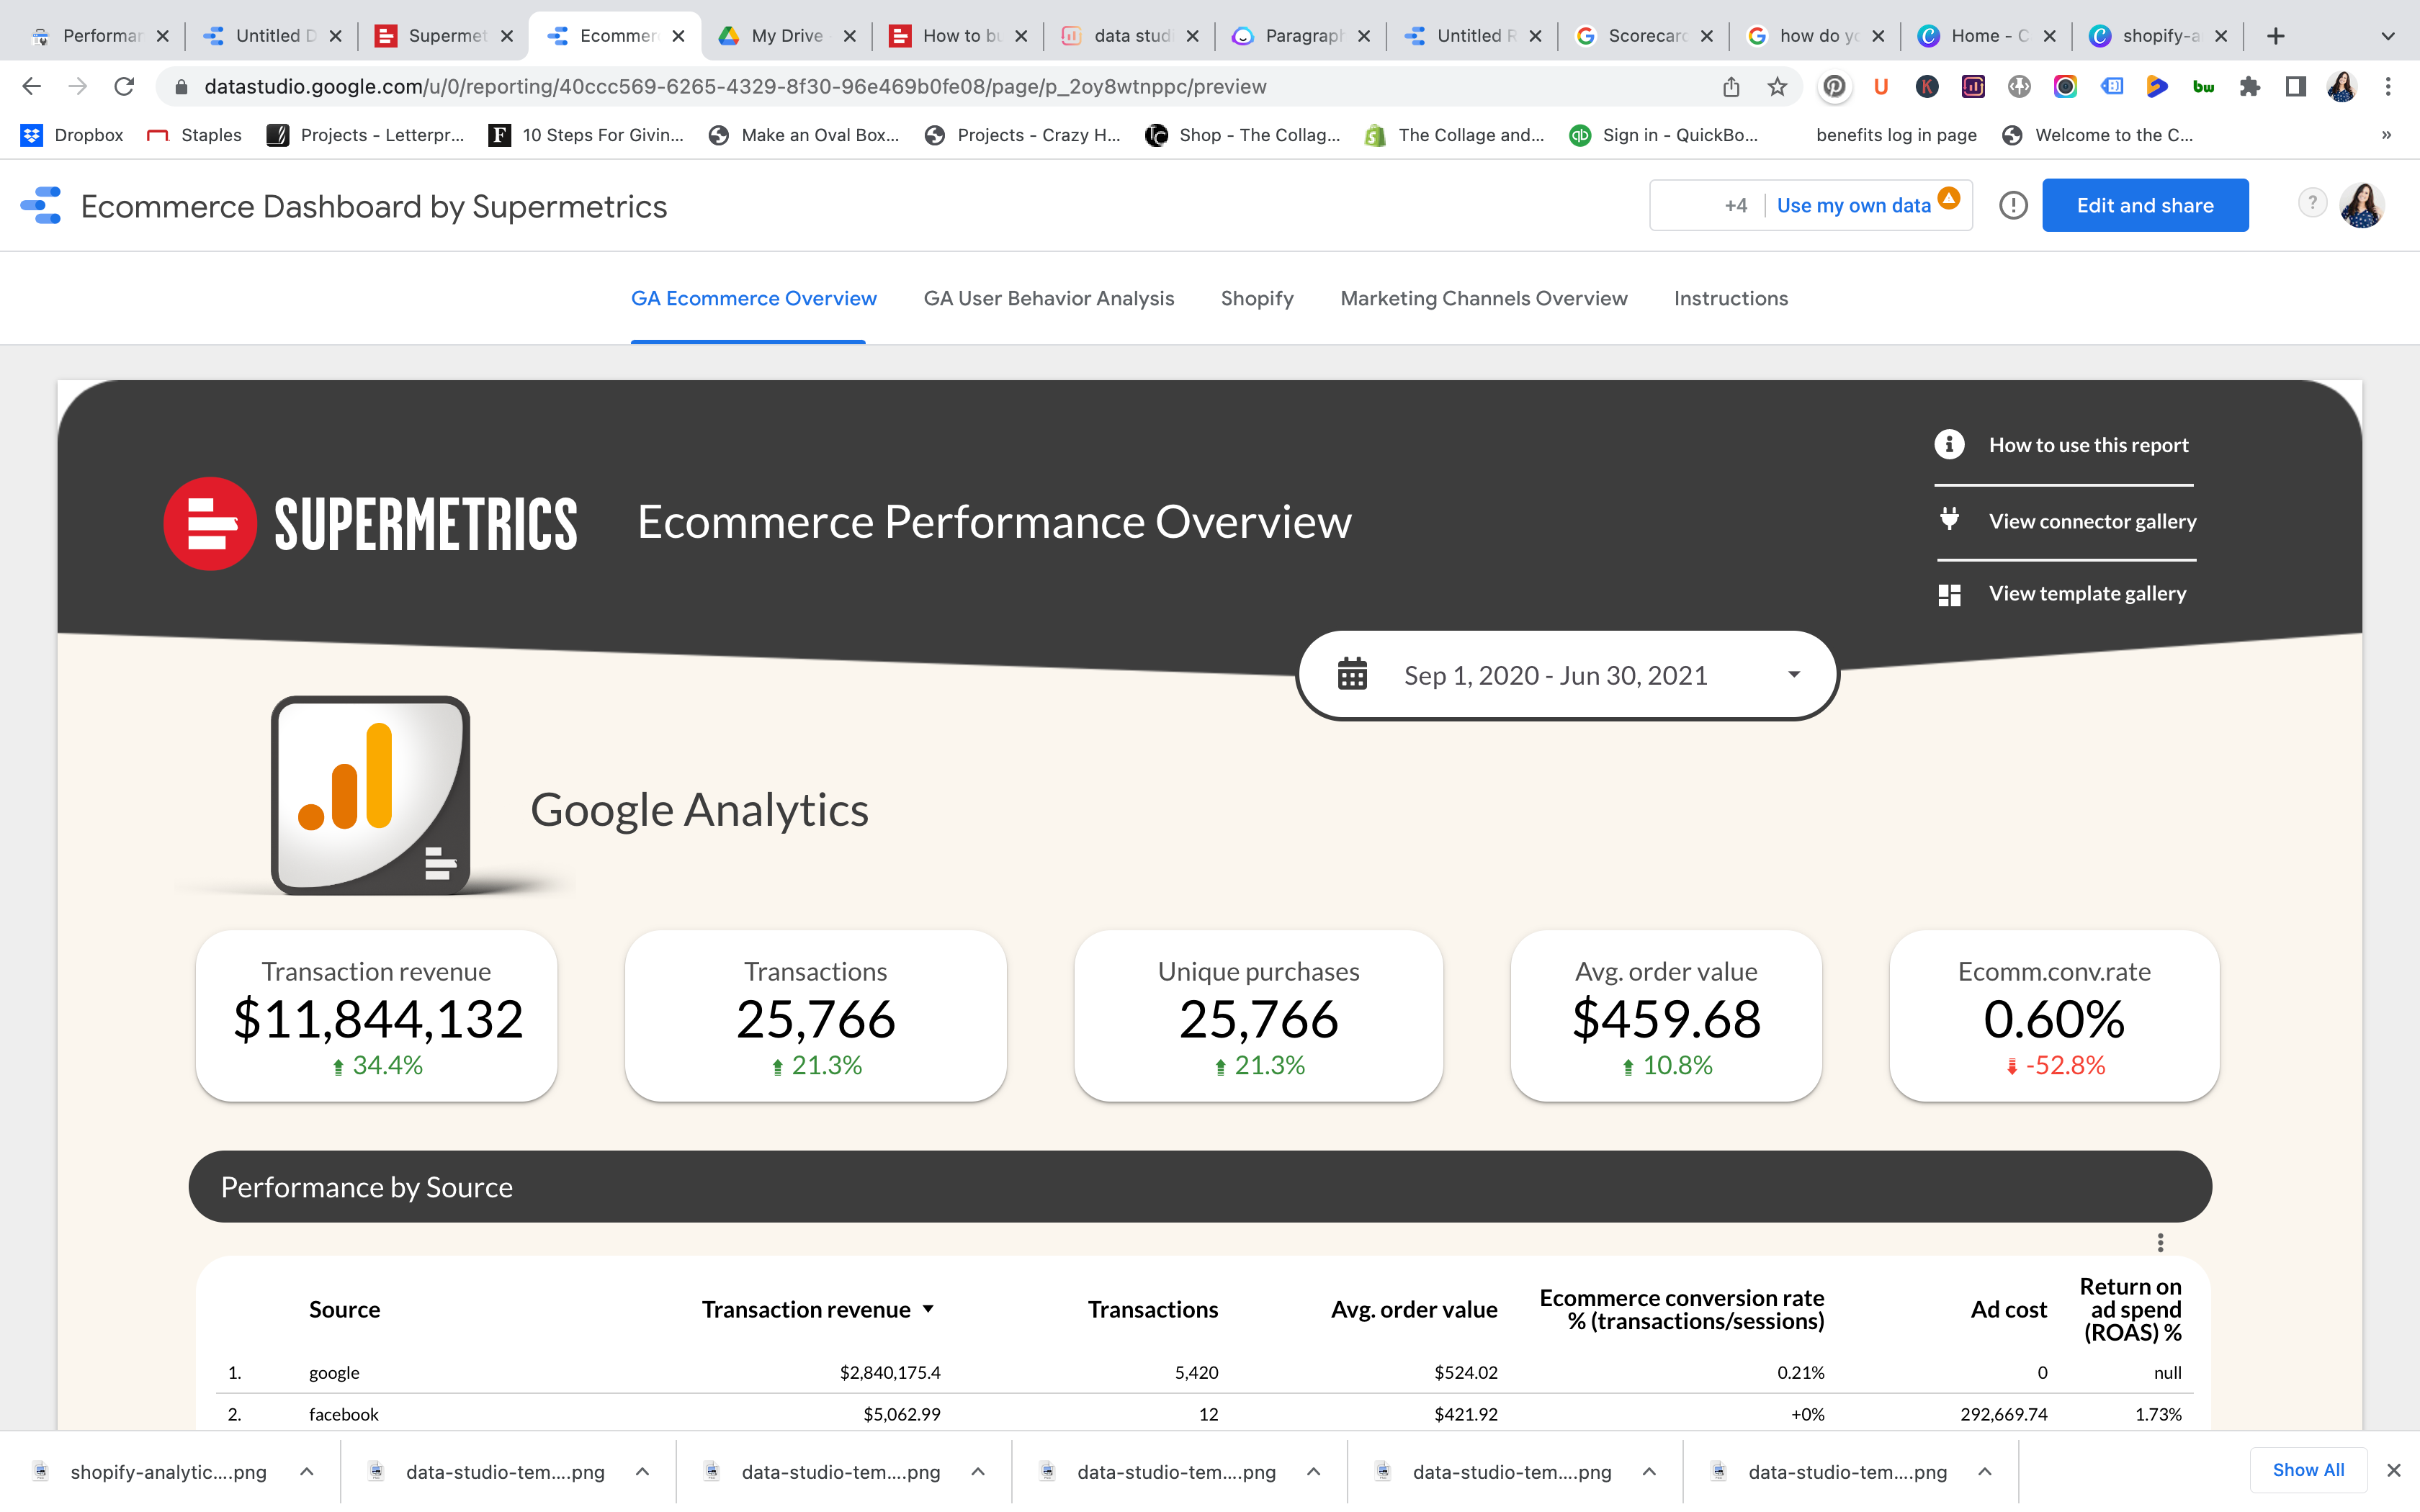 Supermetrics is one example of a data studio template that you can use to display your search console data in a meaningful way.